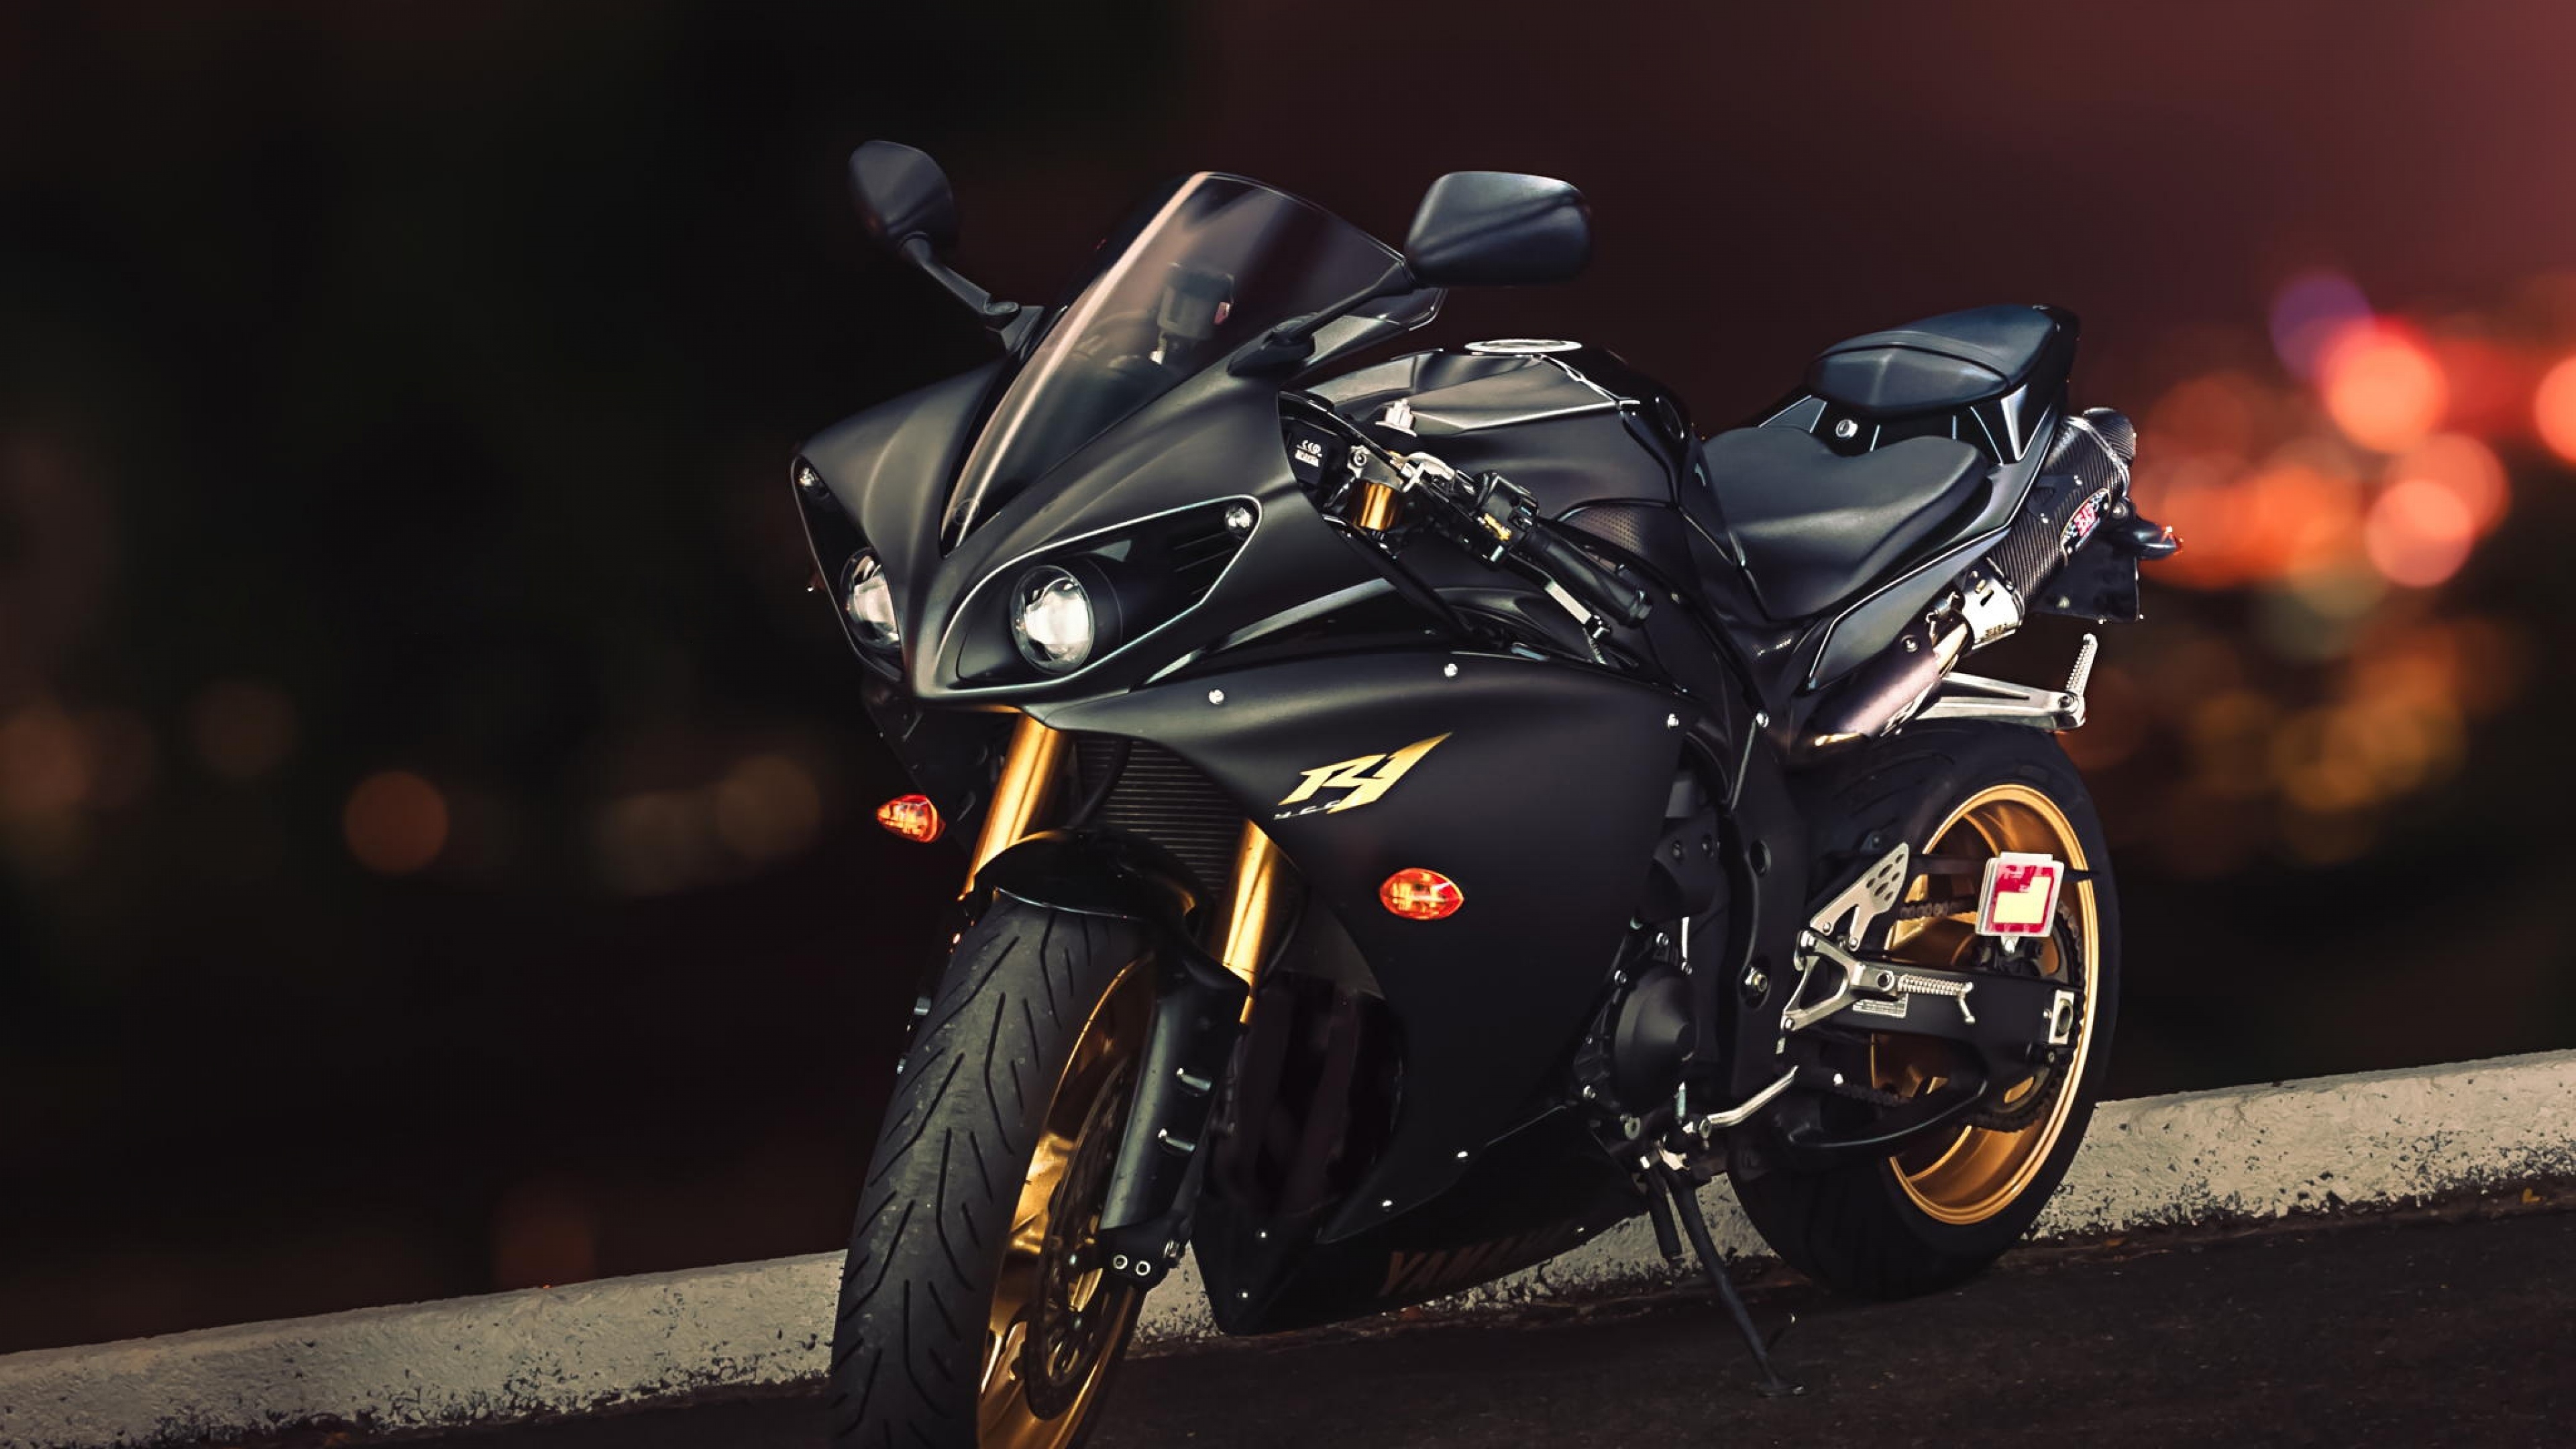 Yamaha R1, HD Bikes, 4k Wallpapers, Images, Backgrounds, Photos and